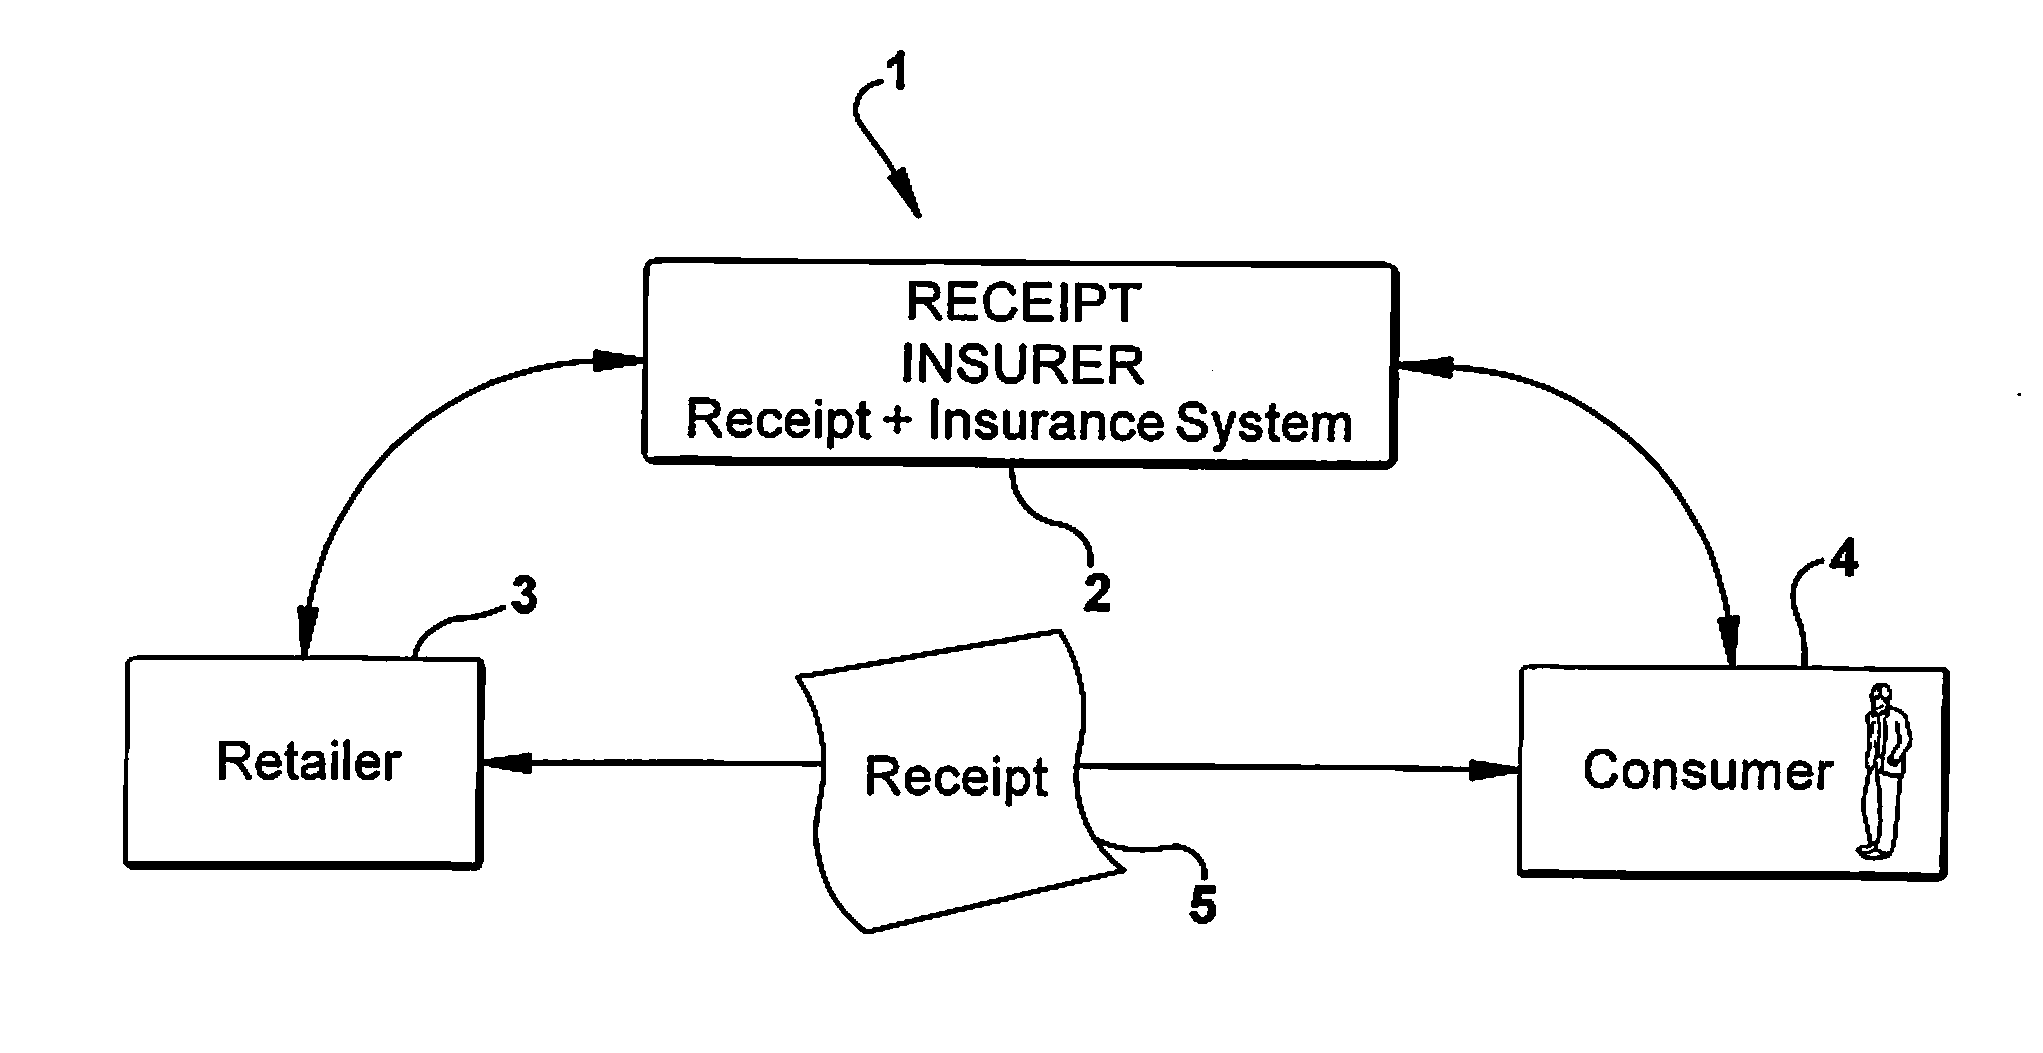 Receipt insurance systems and methods